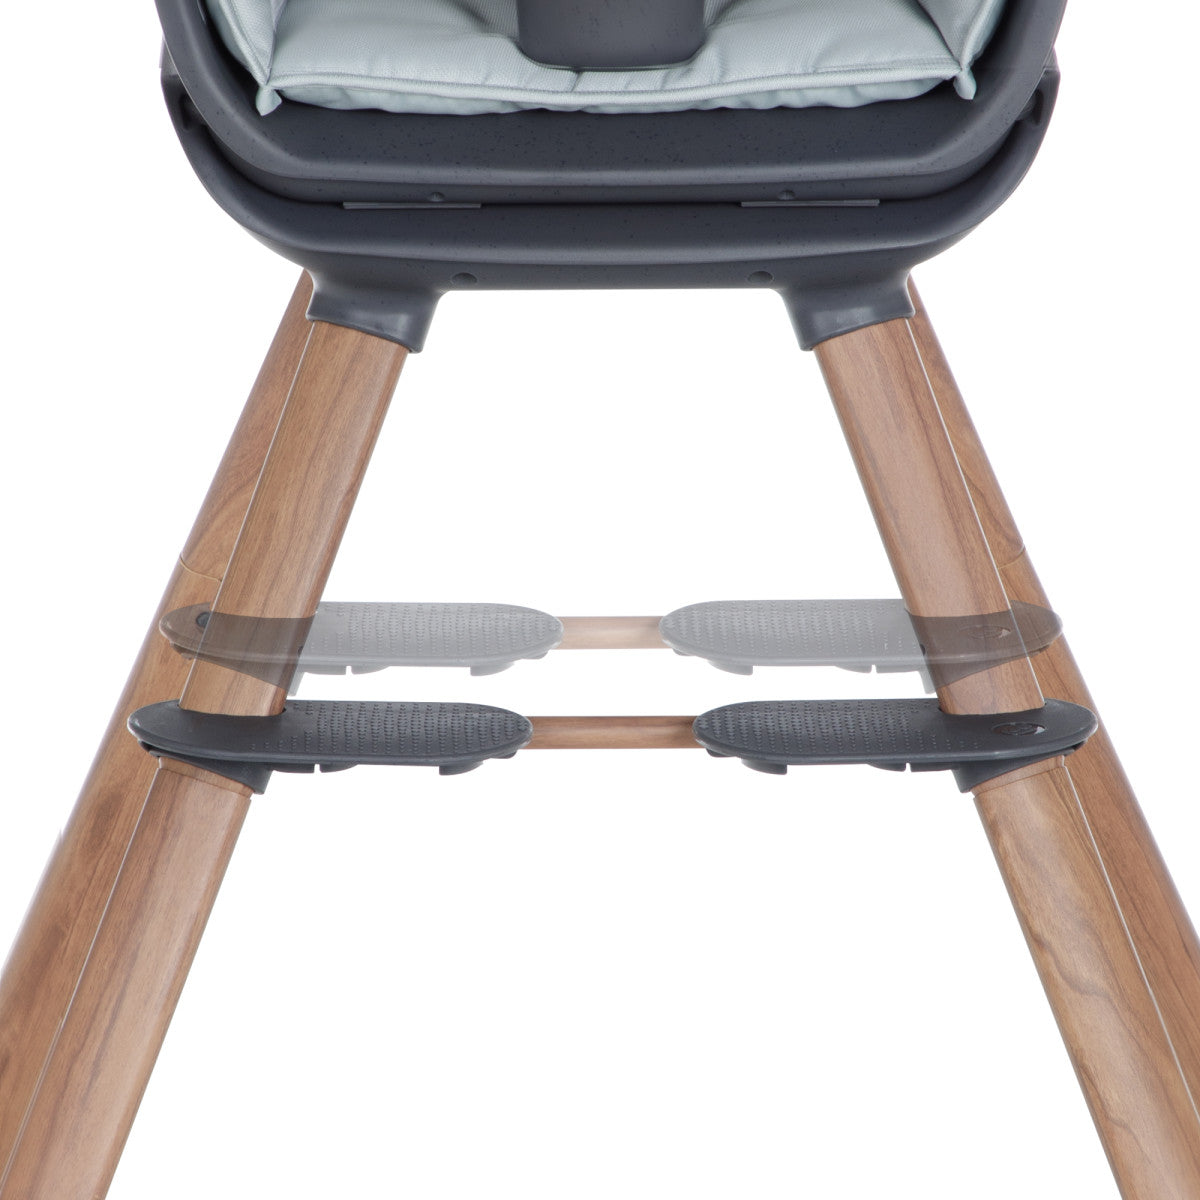 Maxi-Cosi Moa 8-in-1 High Chair - Twinkle Twinkle Little One